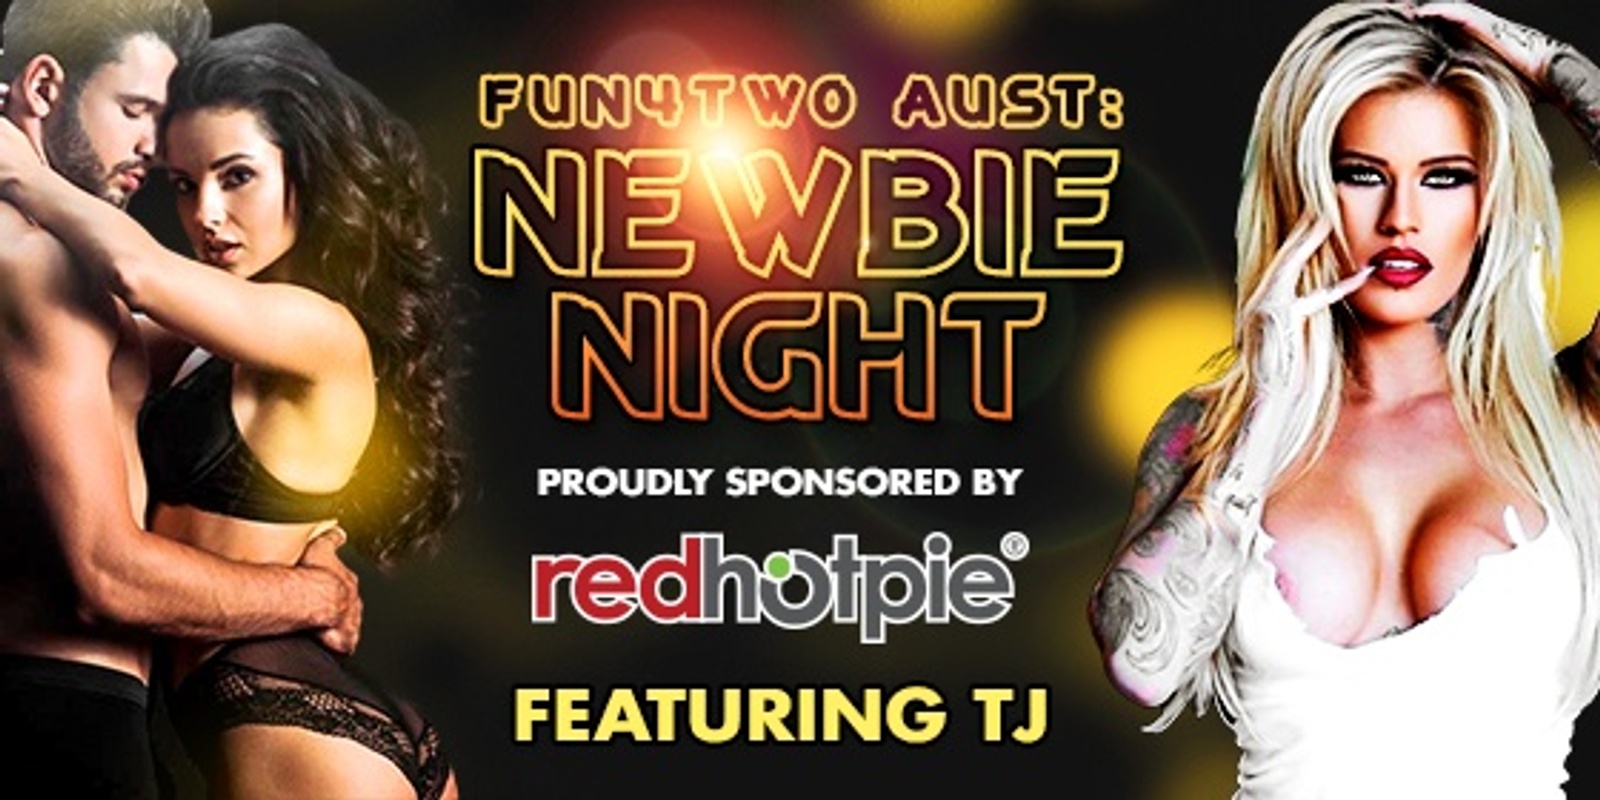 Banner image for Newbie Night (FEATURING TJ)